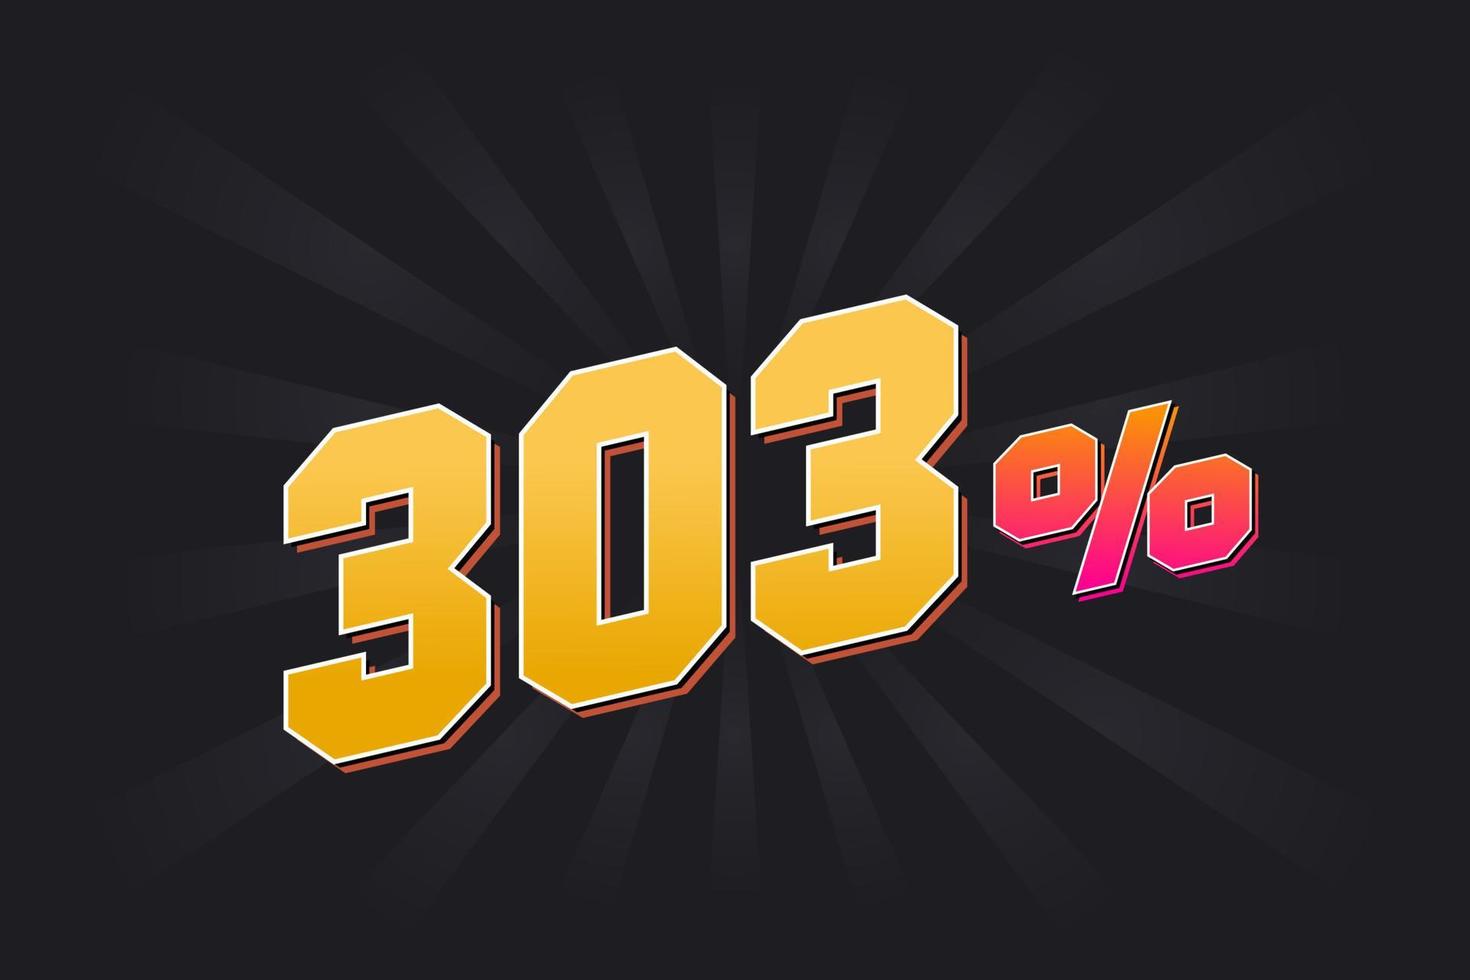 303 discount banner with dark background and yellow text. 303 percent sales promotional design. vector